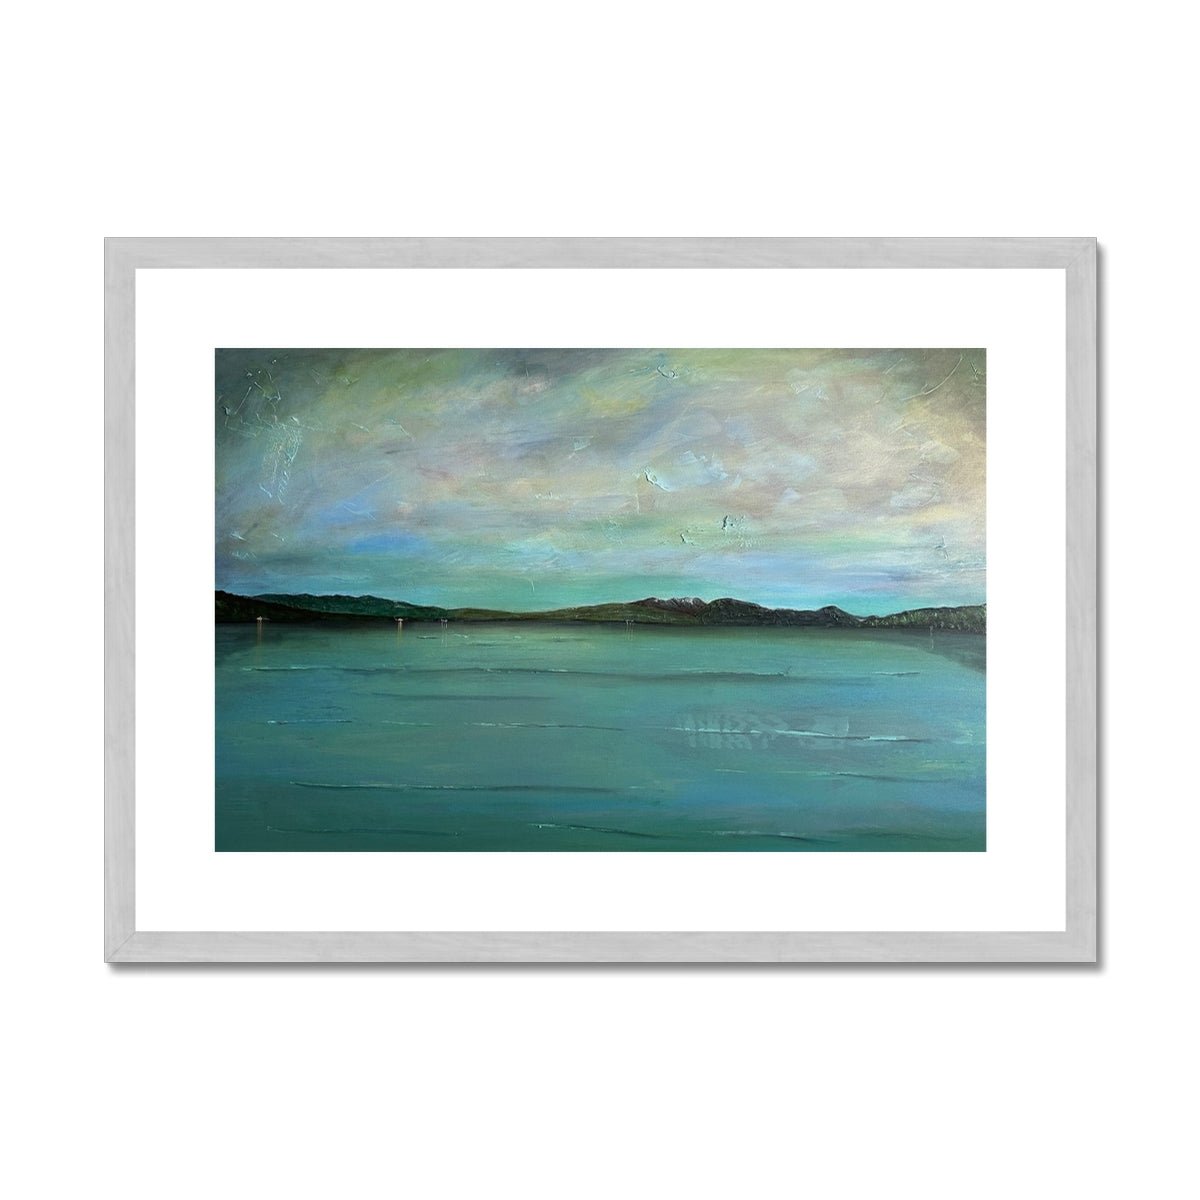 An Emerald Loch Lomond Painting | Antique Framed & Mounted Prints From Scotland-Antique Framed & Mounted Prints-Scottish Lochs & Mountains Art Gallery-A2 Landscape-Silver Frame-Paintings, Prints, Homeware, Art Gifts From Scotland By Scottish Artist Kevin Hunter